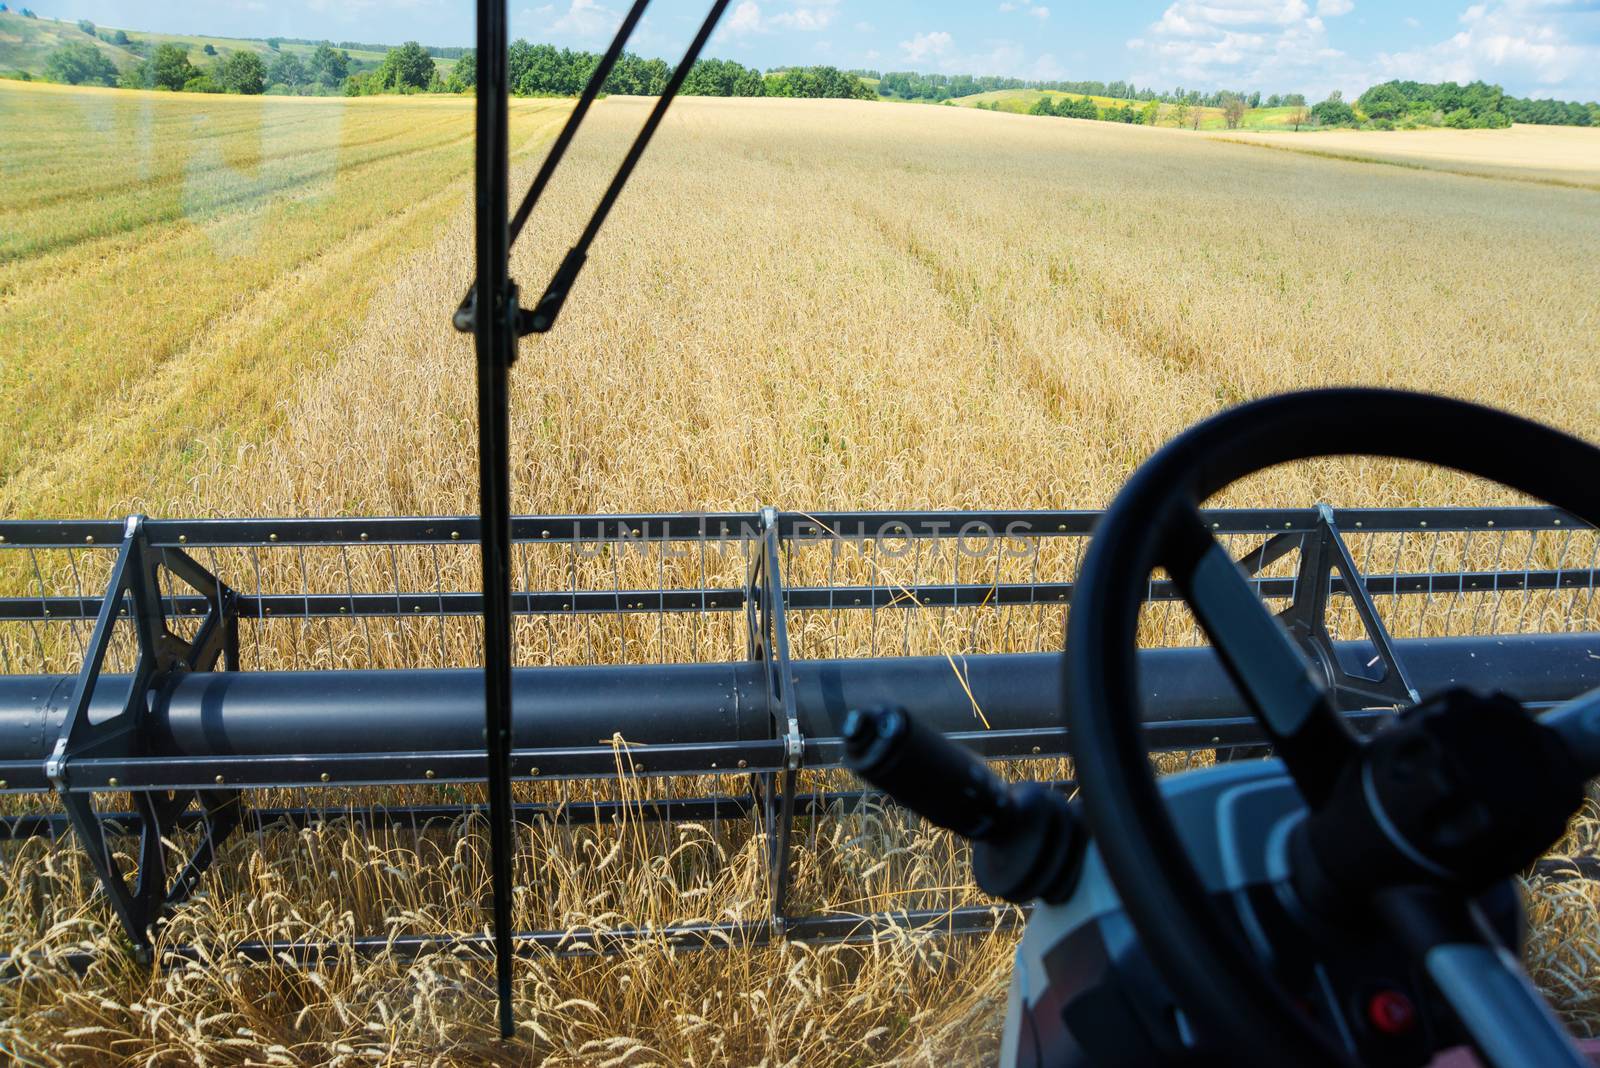 View from the cabin of a combine harvester at the wheat field by Epitavi